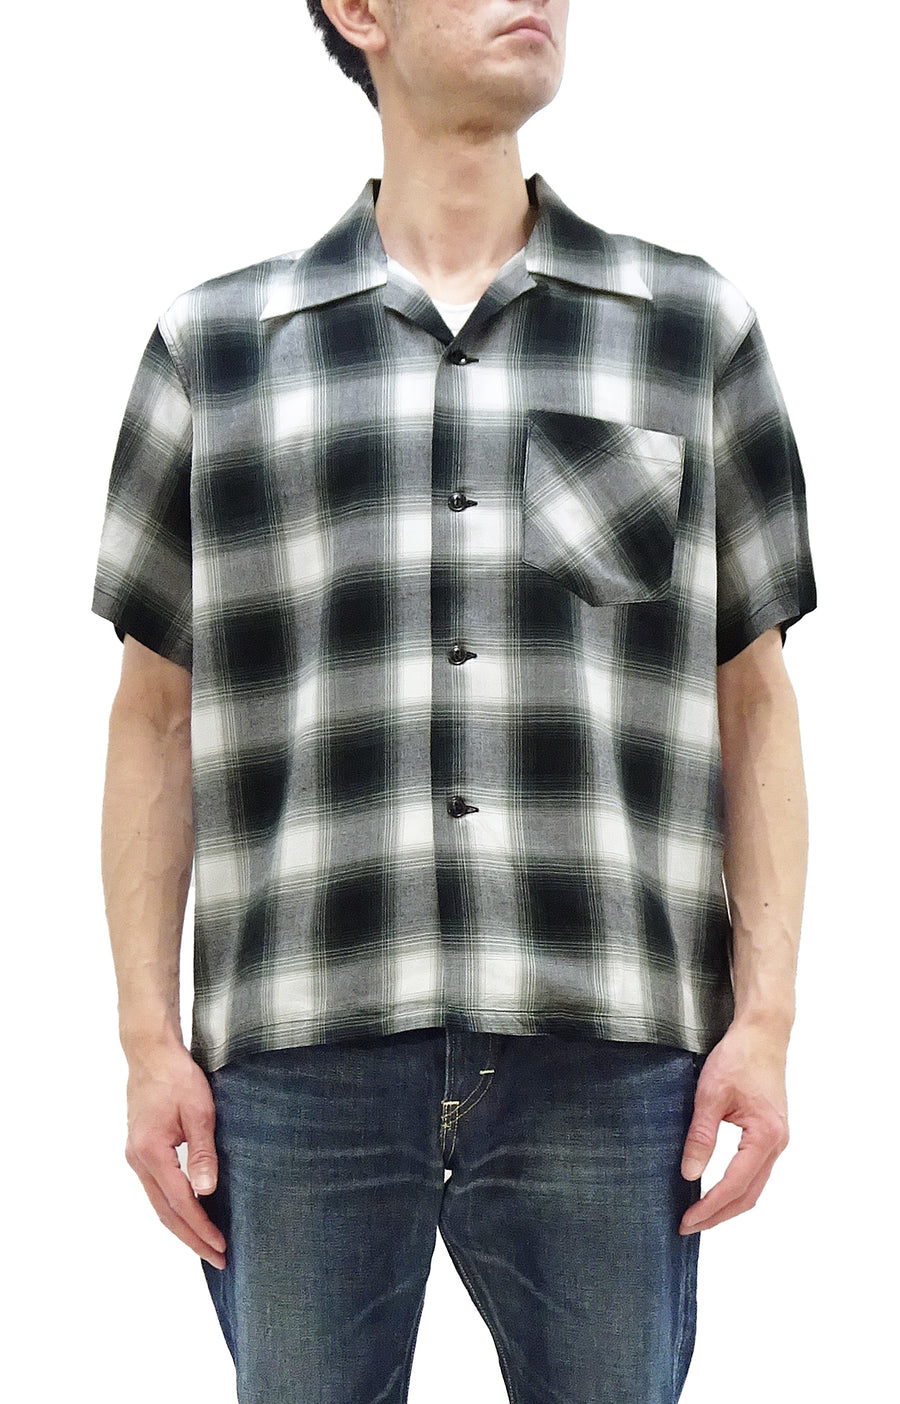 Sugar Cane Rayon Ombre Plaid Shirt Men's Oversized Fit Resort 